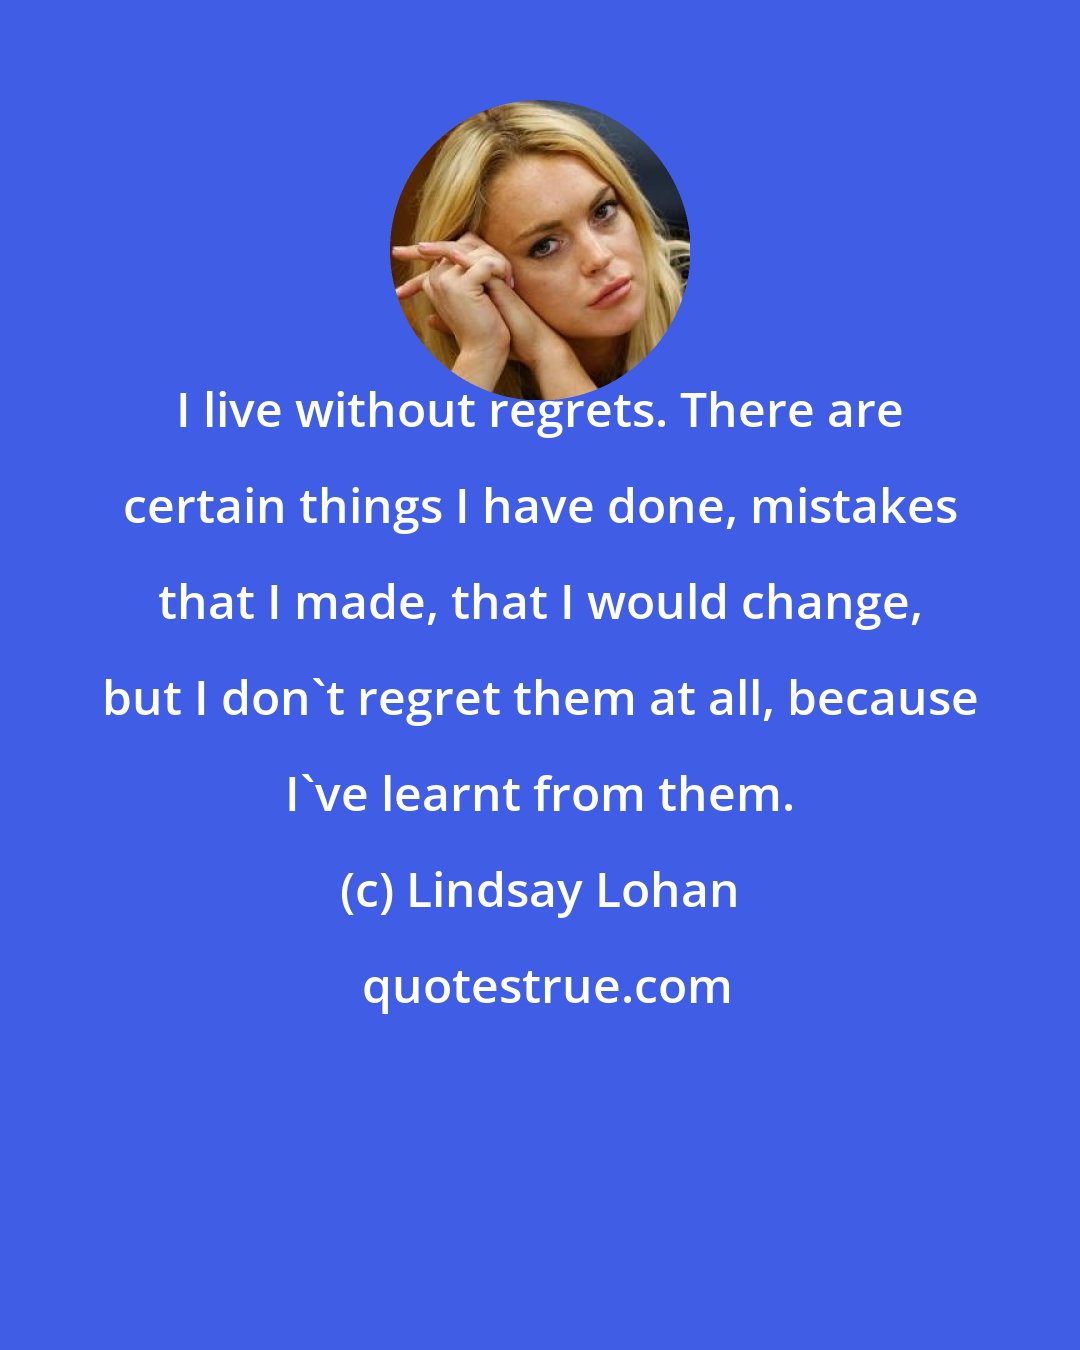 Lindsay Lohan: I live without regrets. There are certain things I have done, mistakes that I made, that I would change, but I don't regret them at all, because I've learnt from them.